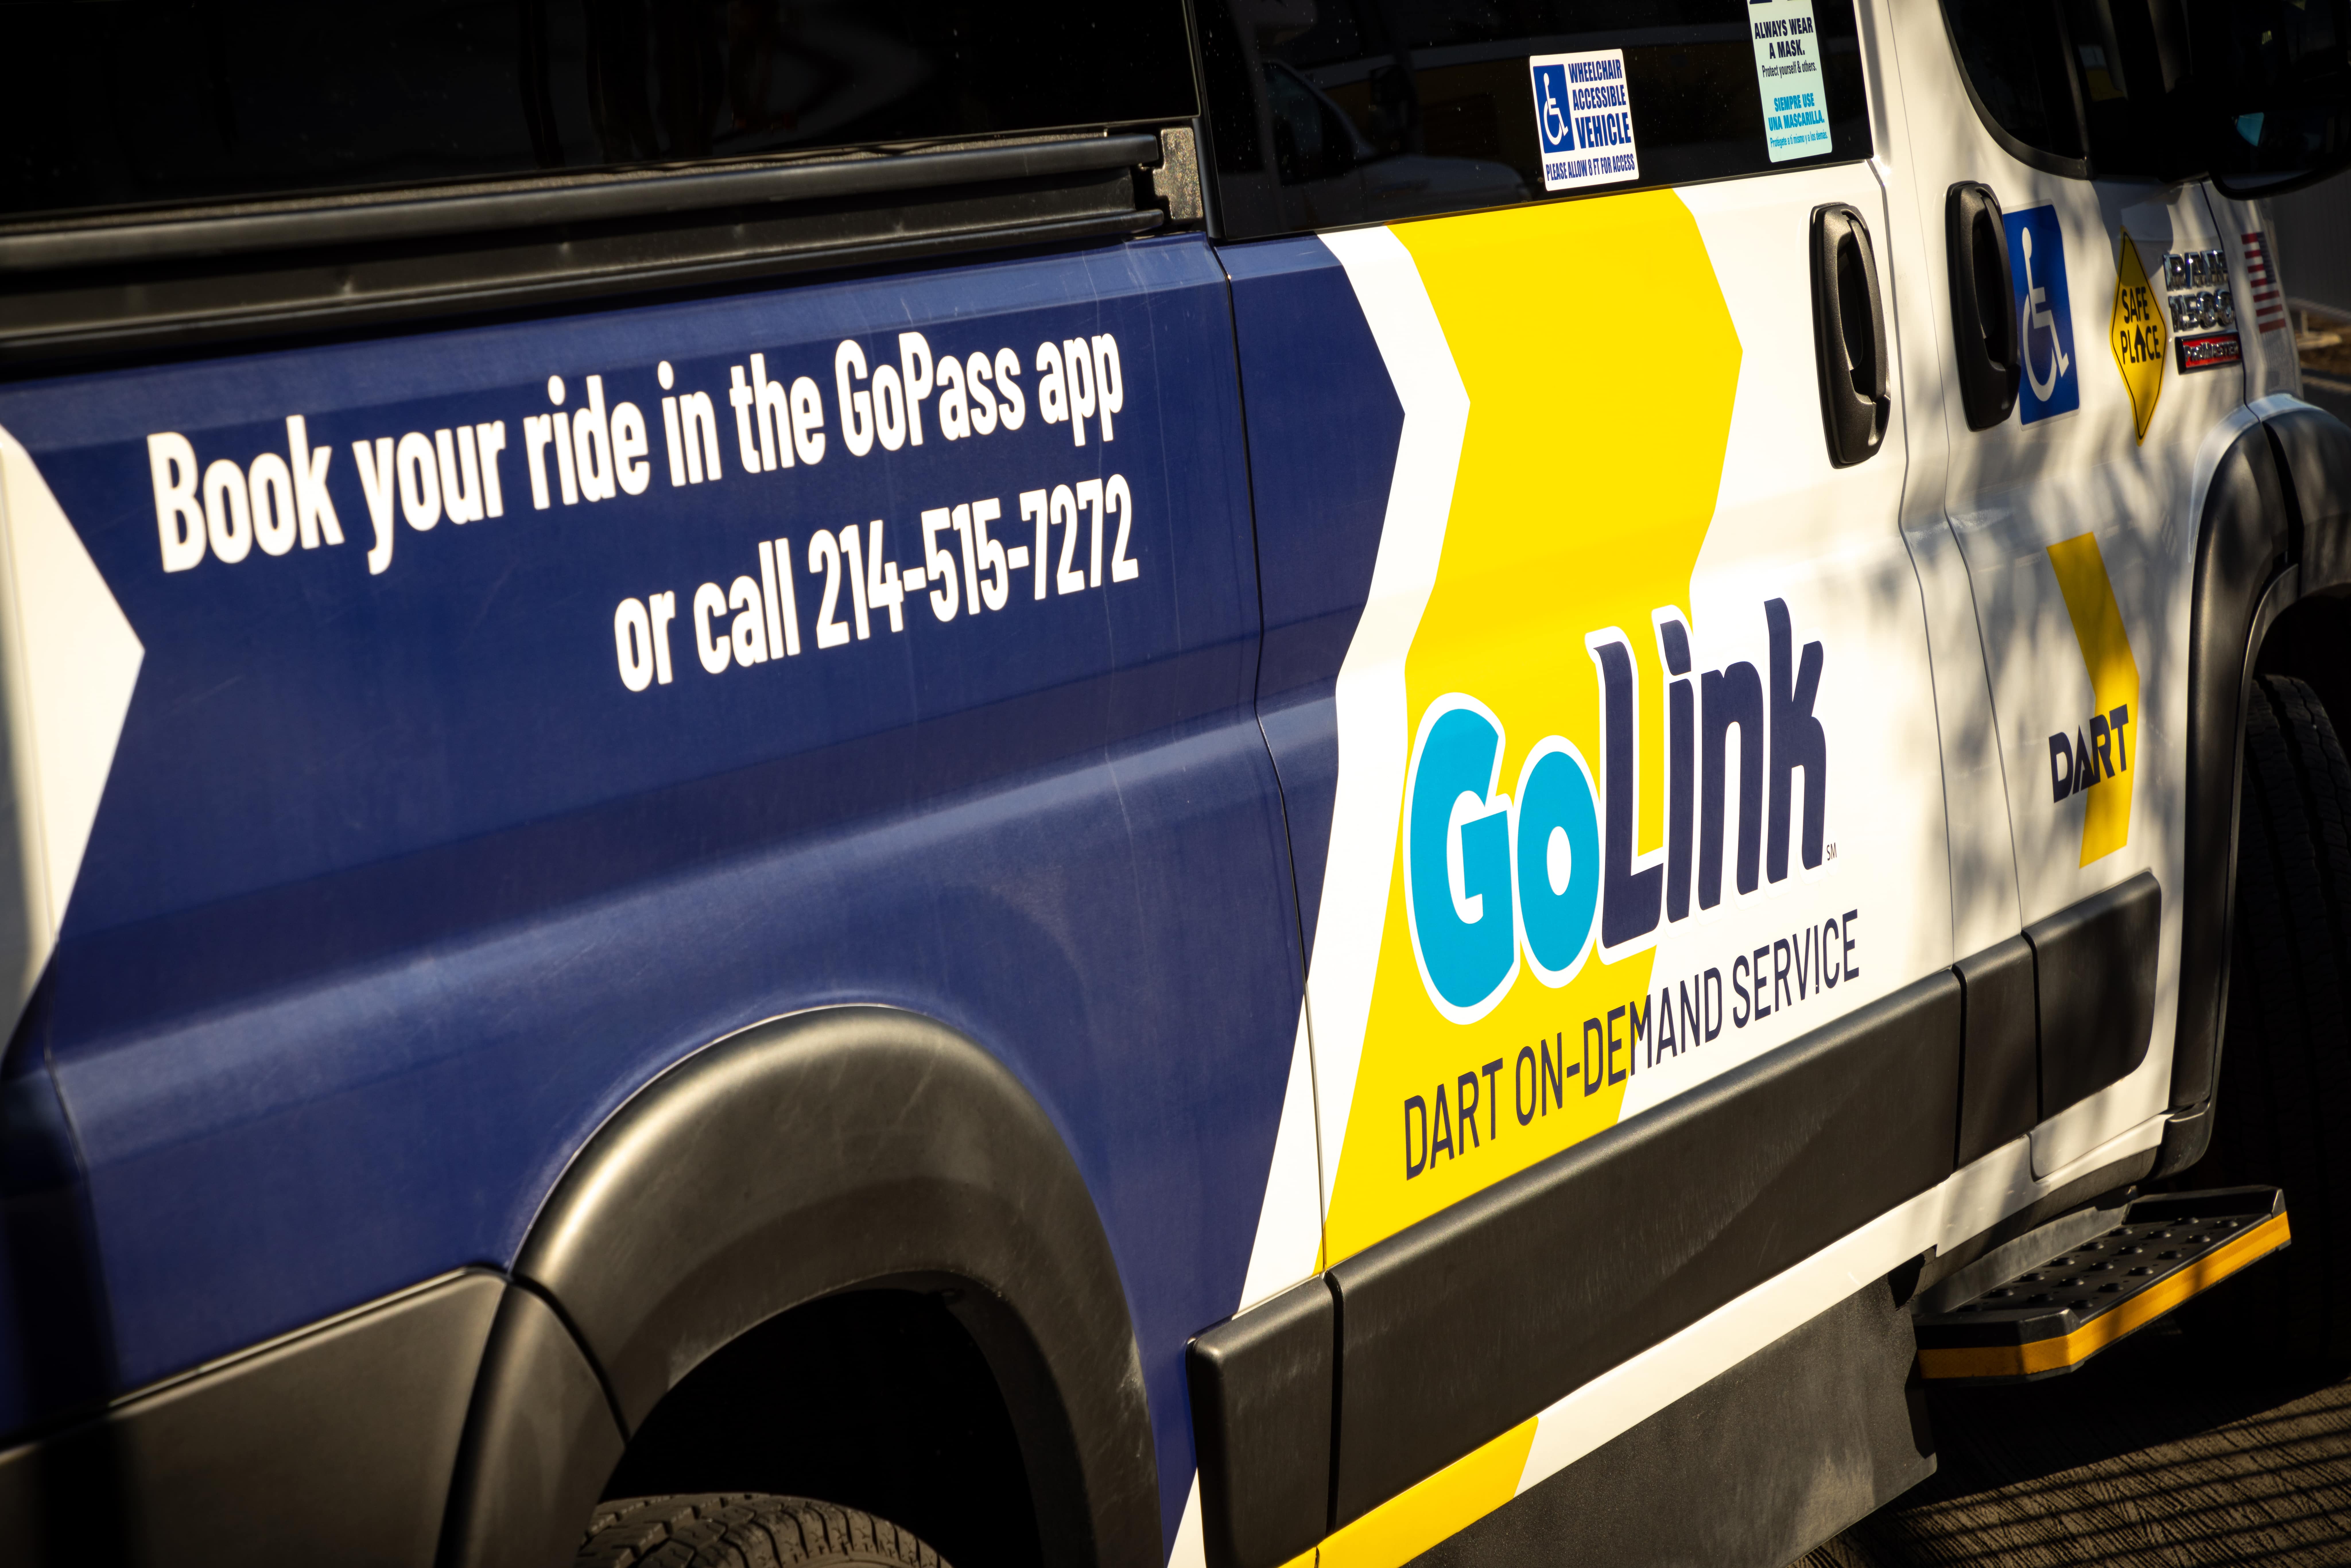 GoLink is extending its hours and days! in all zones on Jan. 23